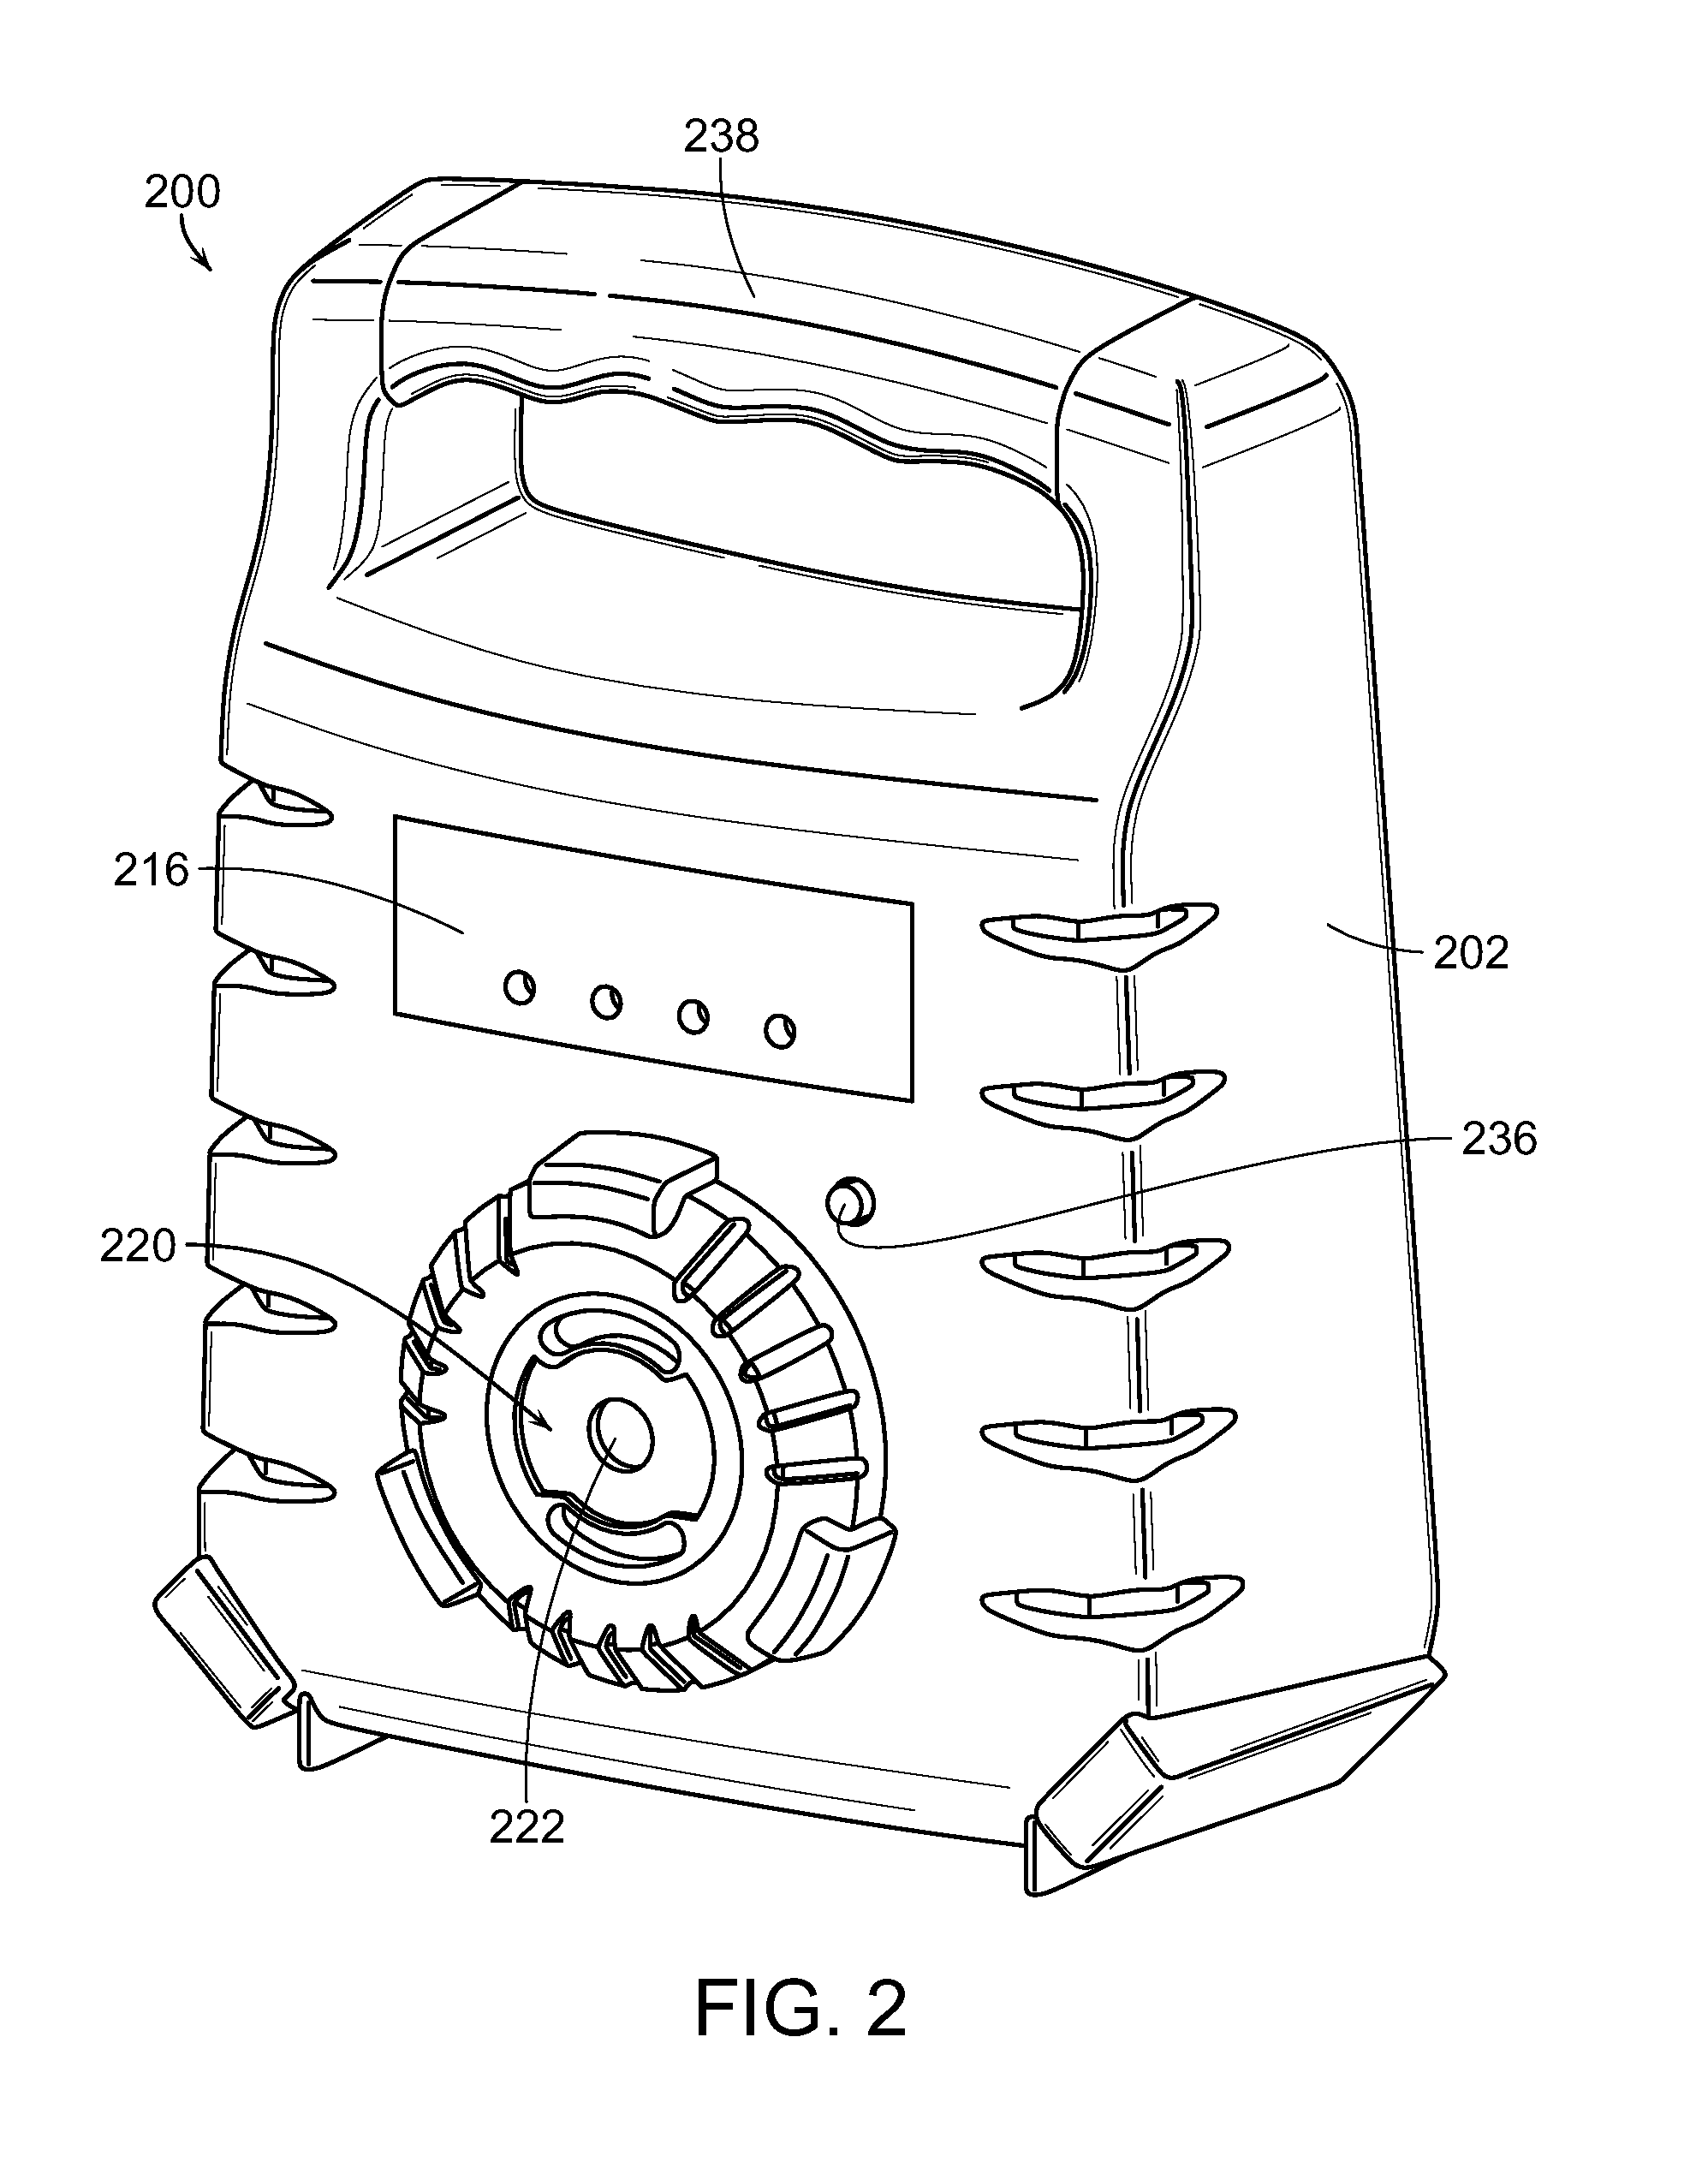 Wireless time attendance system and method